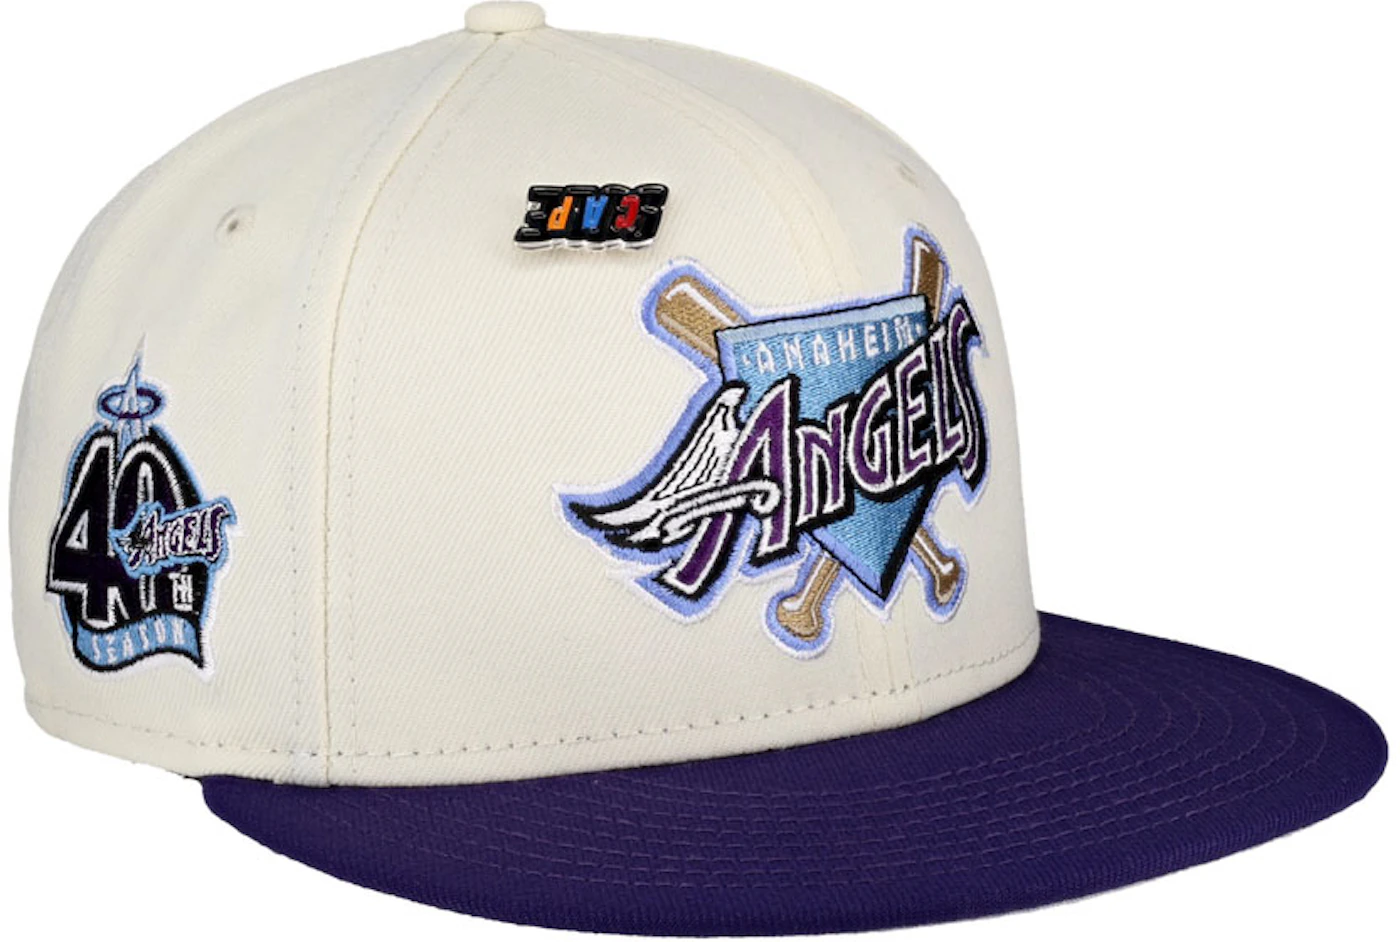 New Era Anaheim Angels City Connect Two Tone Edition 59Fifty Fitted Hat, EXCLUSIVE HATS, CAPS